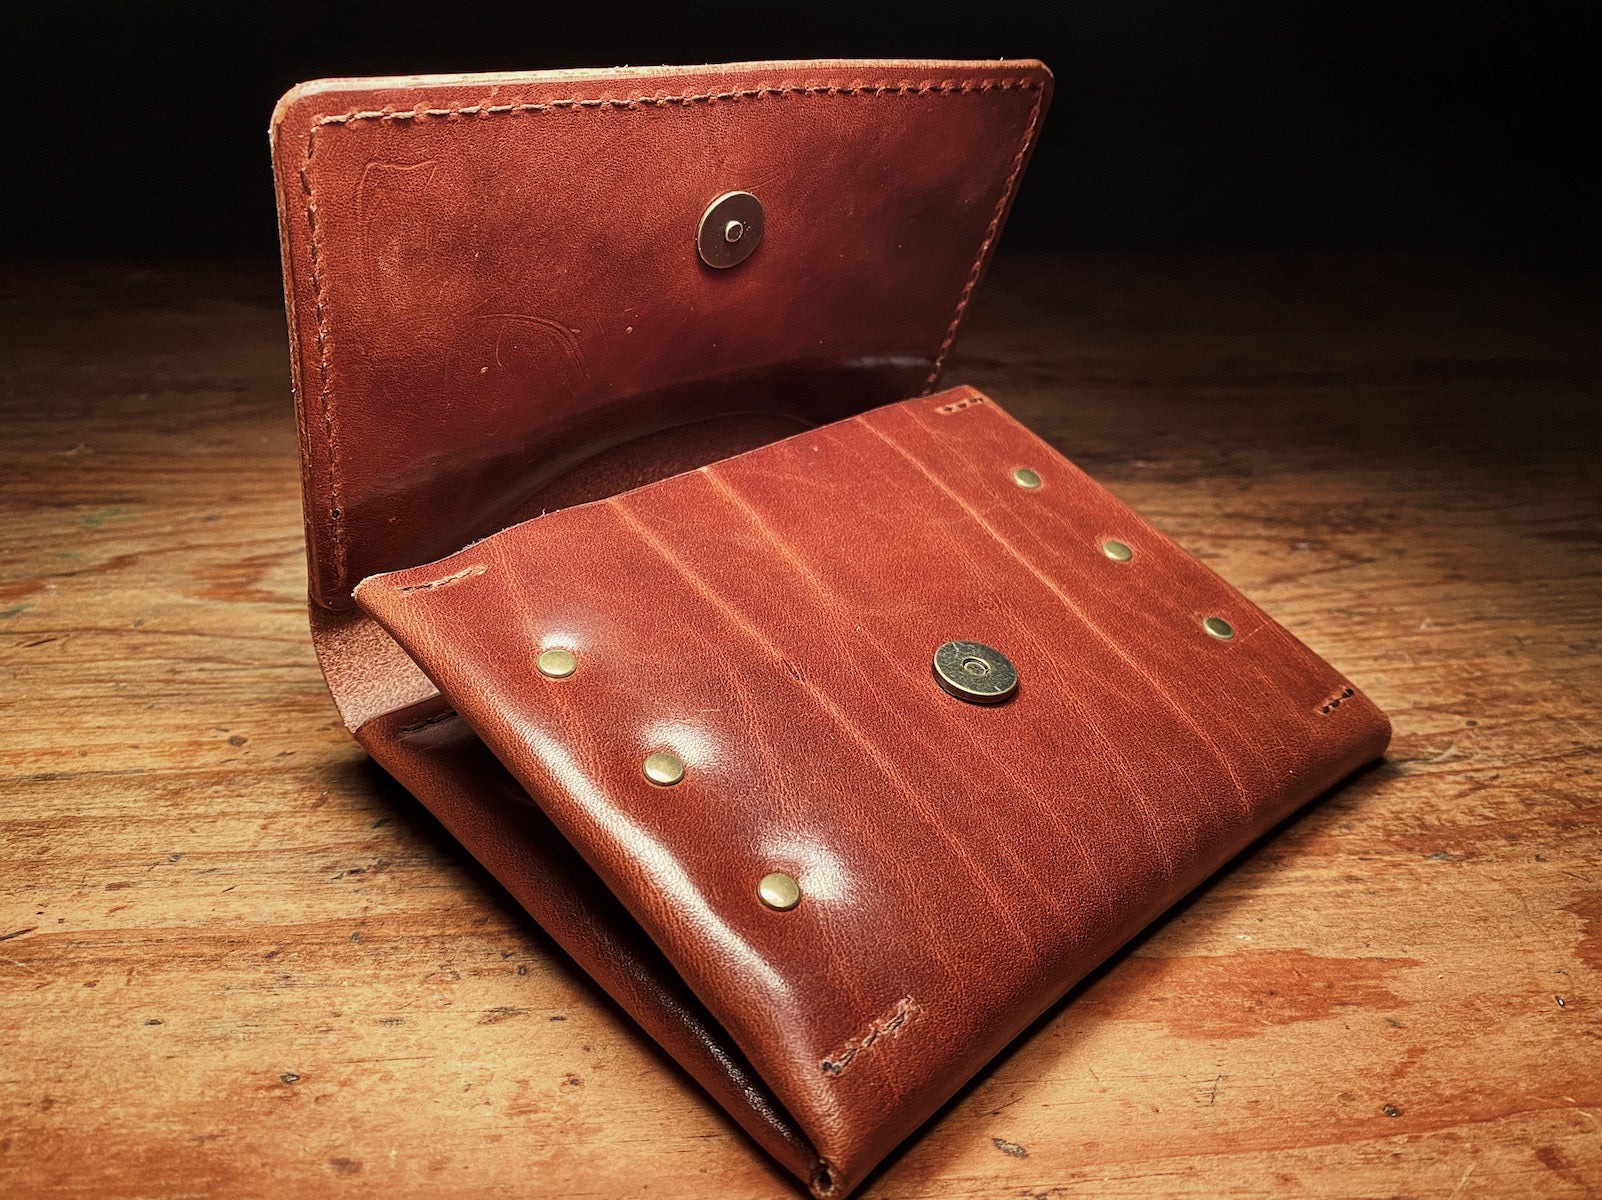 half open fly wallet, showing magnetic closure and natural markings of full-grain brown leather